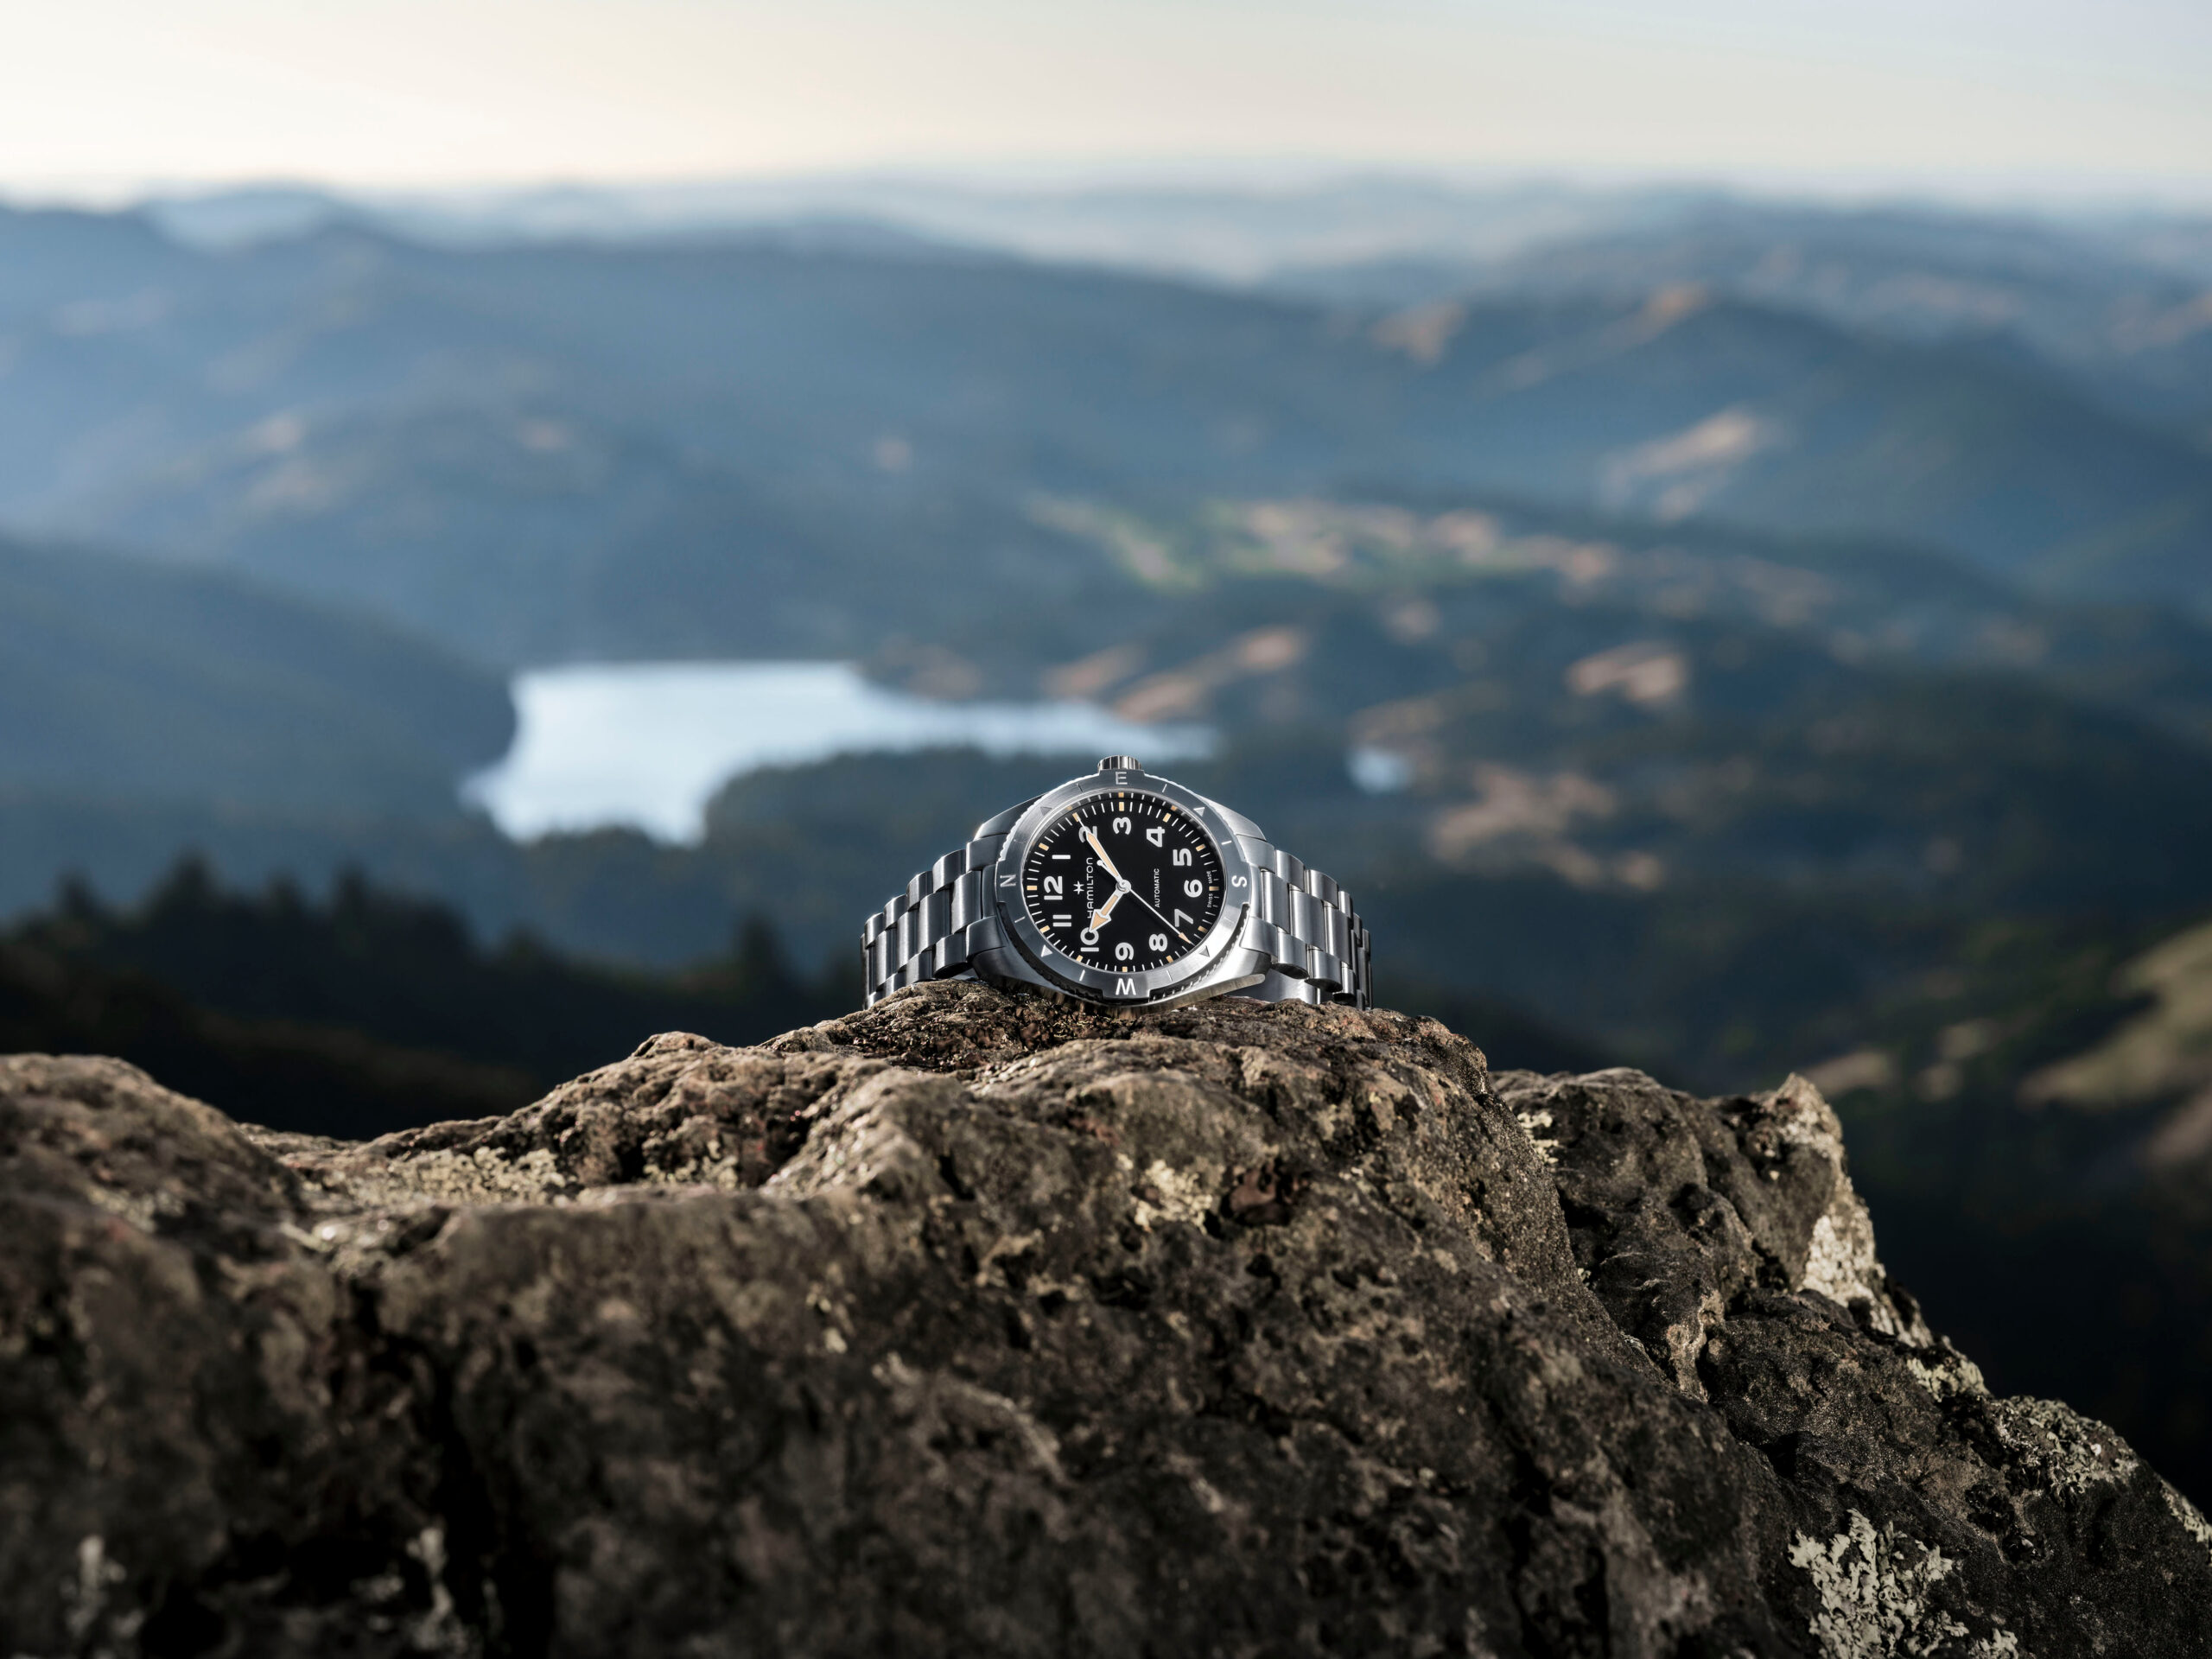 Hamilton Khaki Field Expedition: Gearing up for the great outdoors